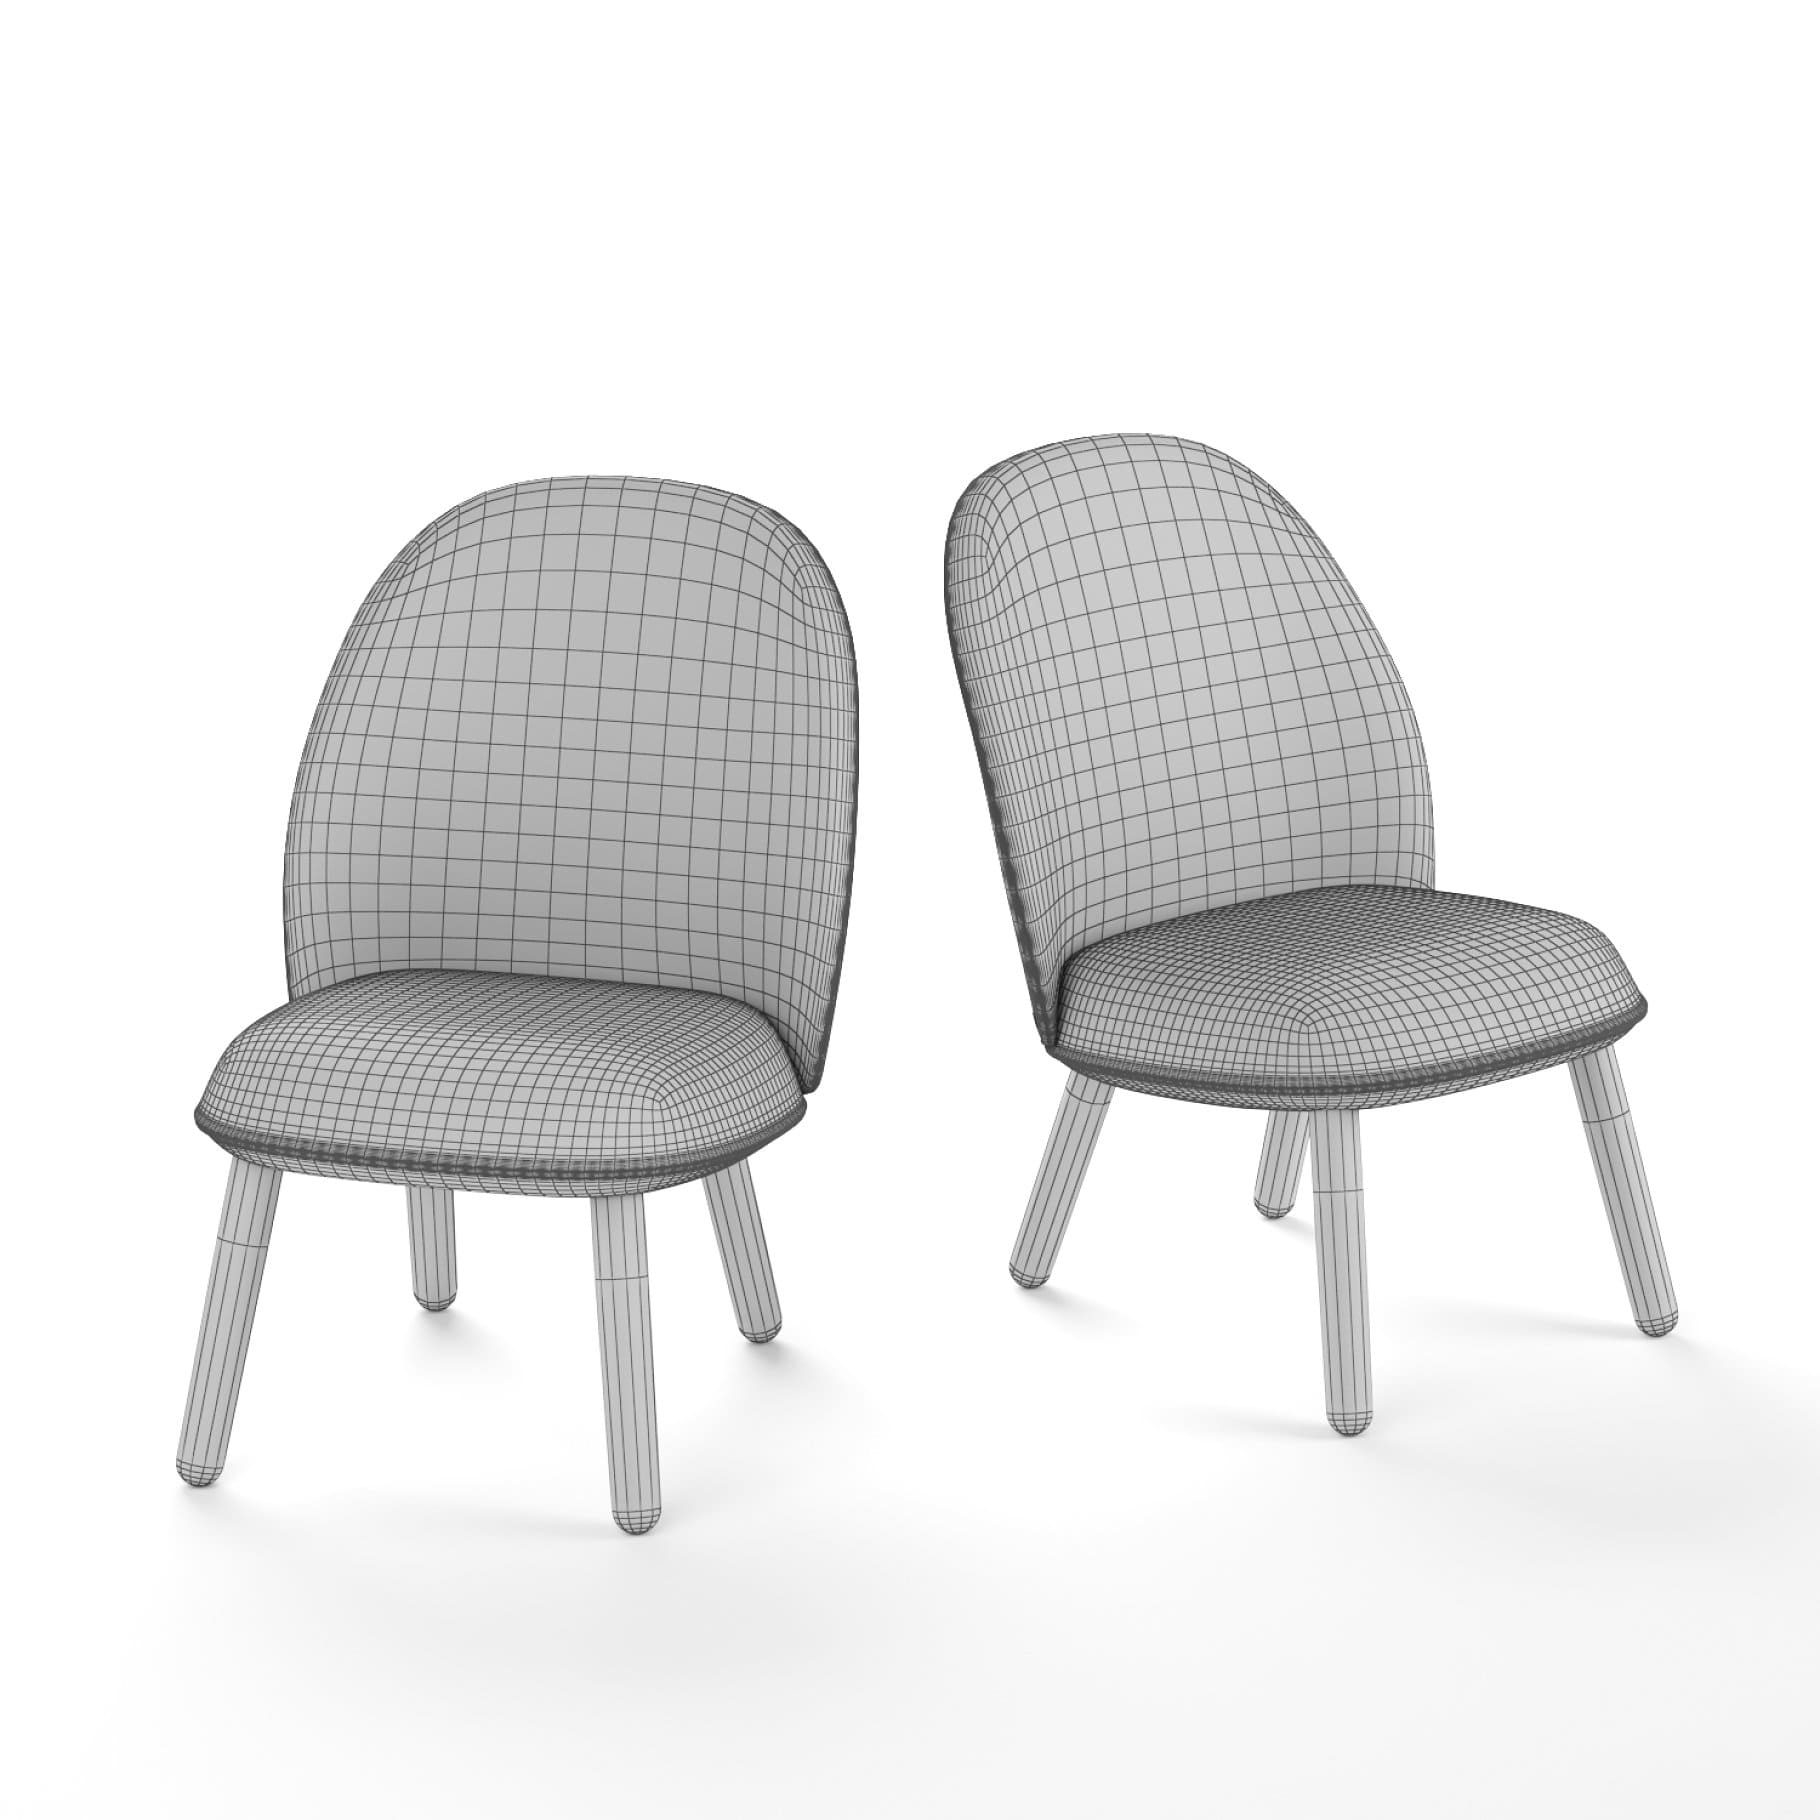 3D model of ACE Lounge Chair on a white background.